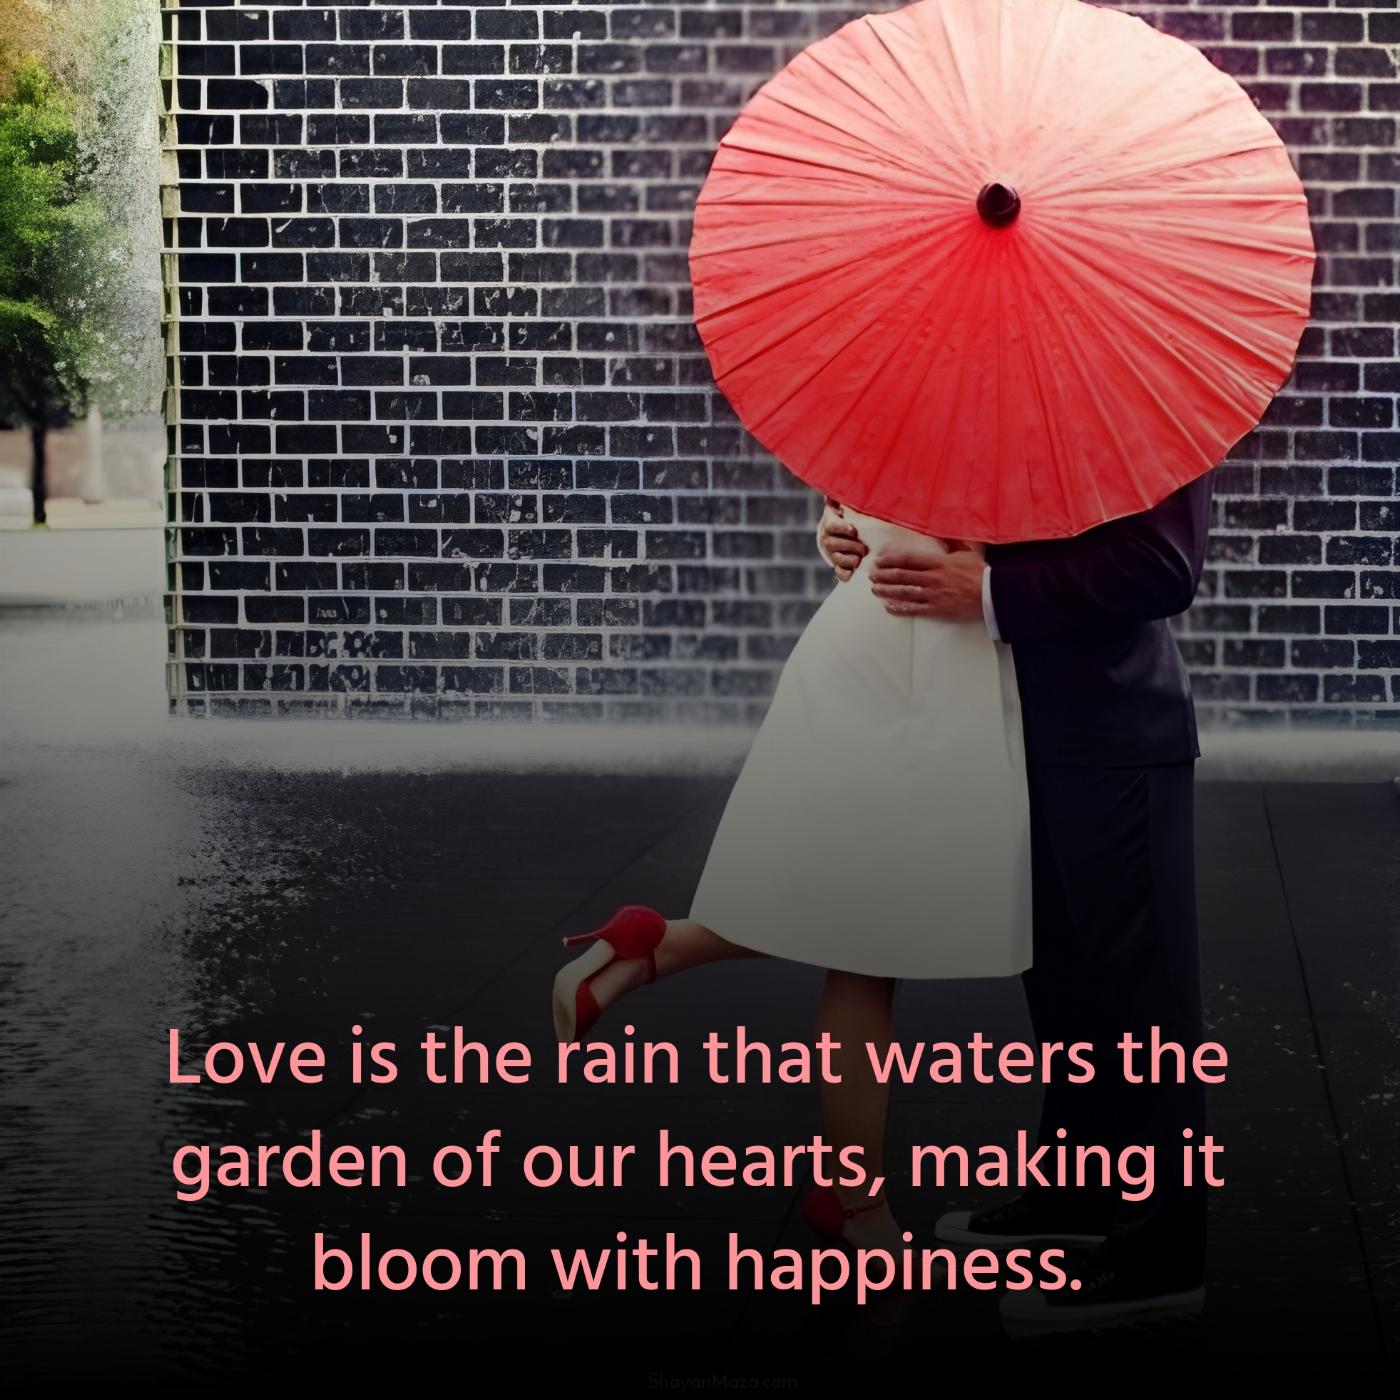 Love is the rain that waters the garden of our hearts